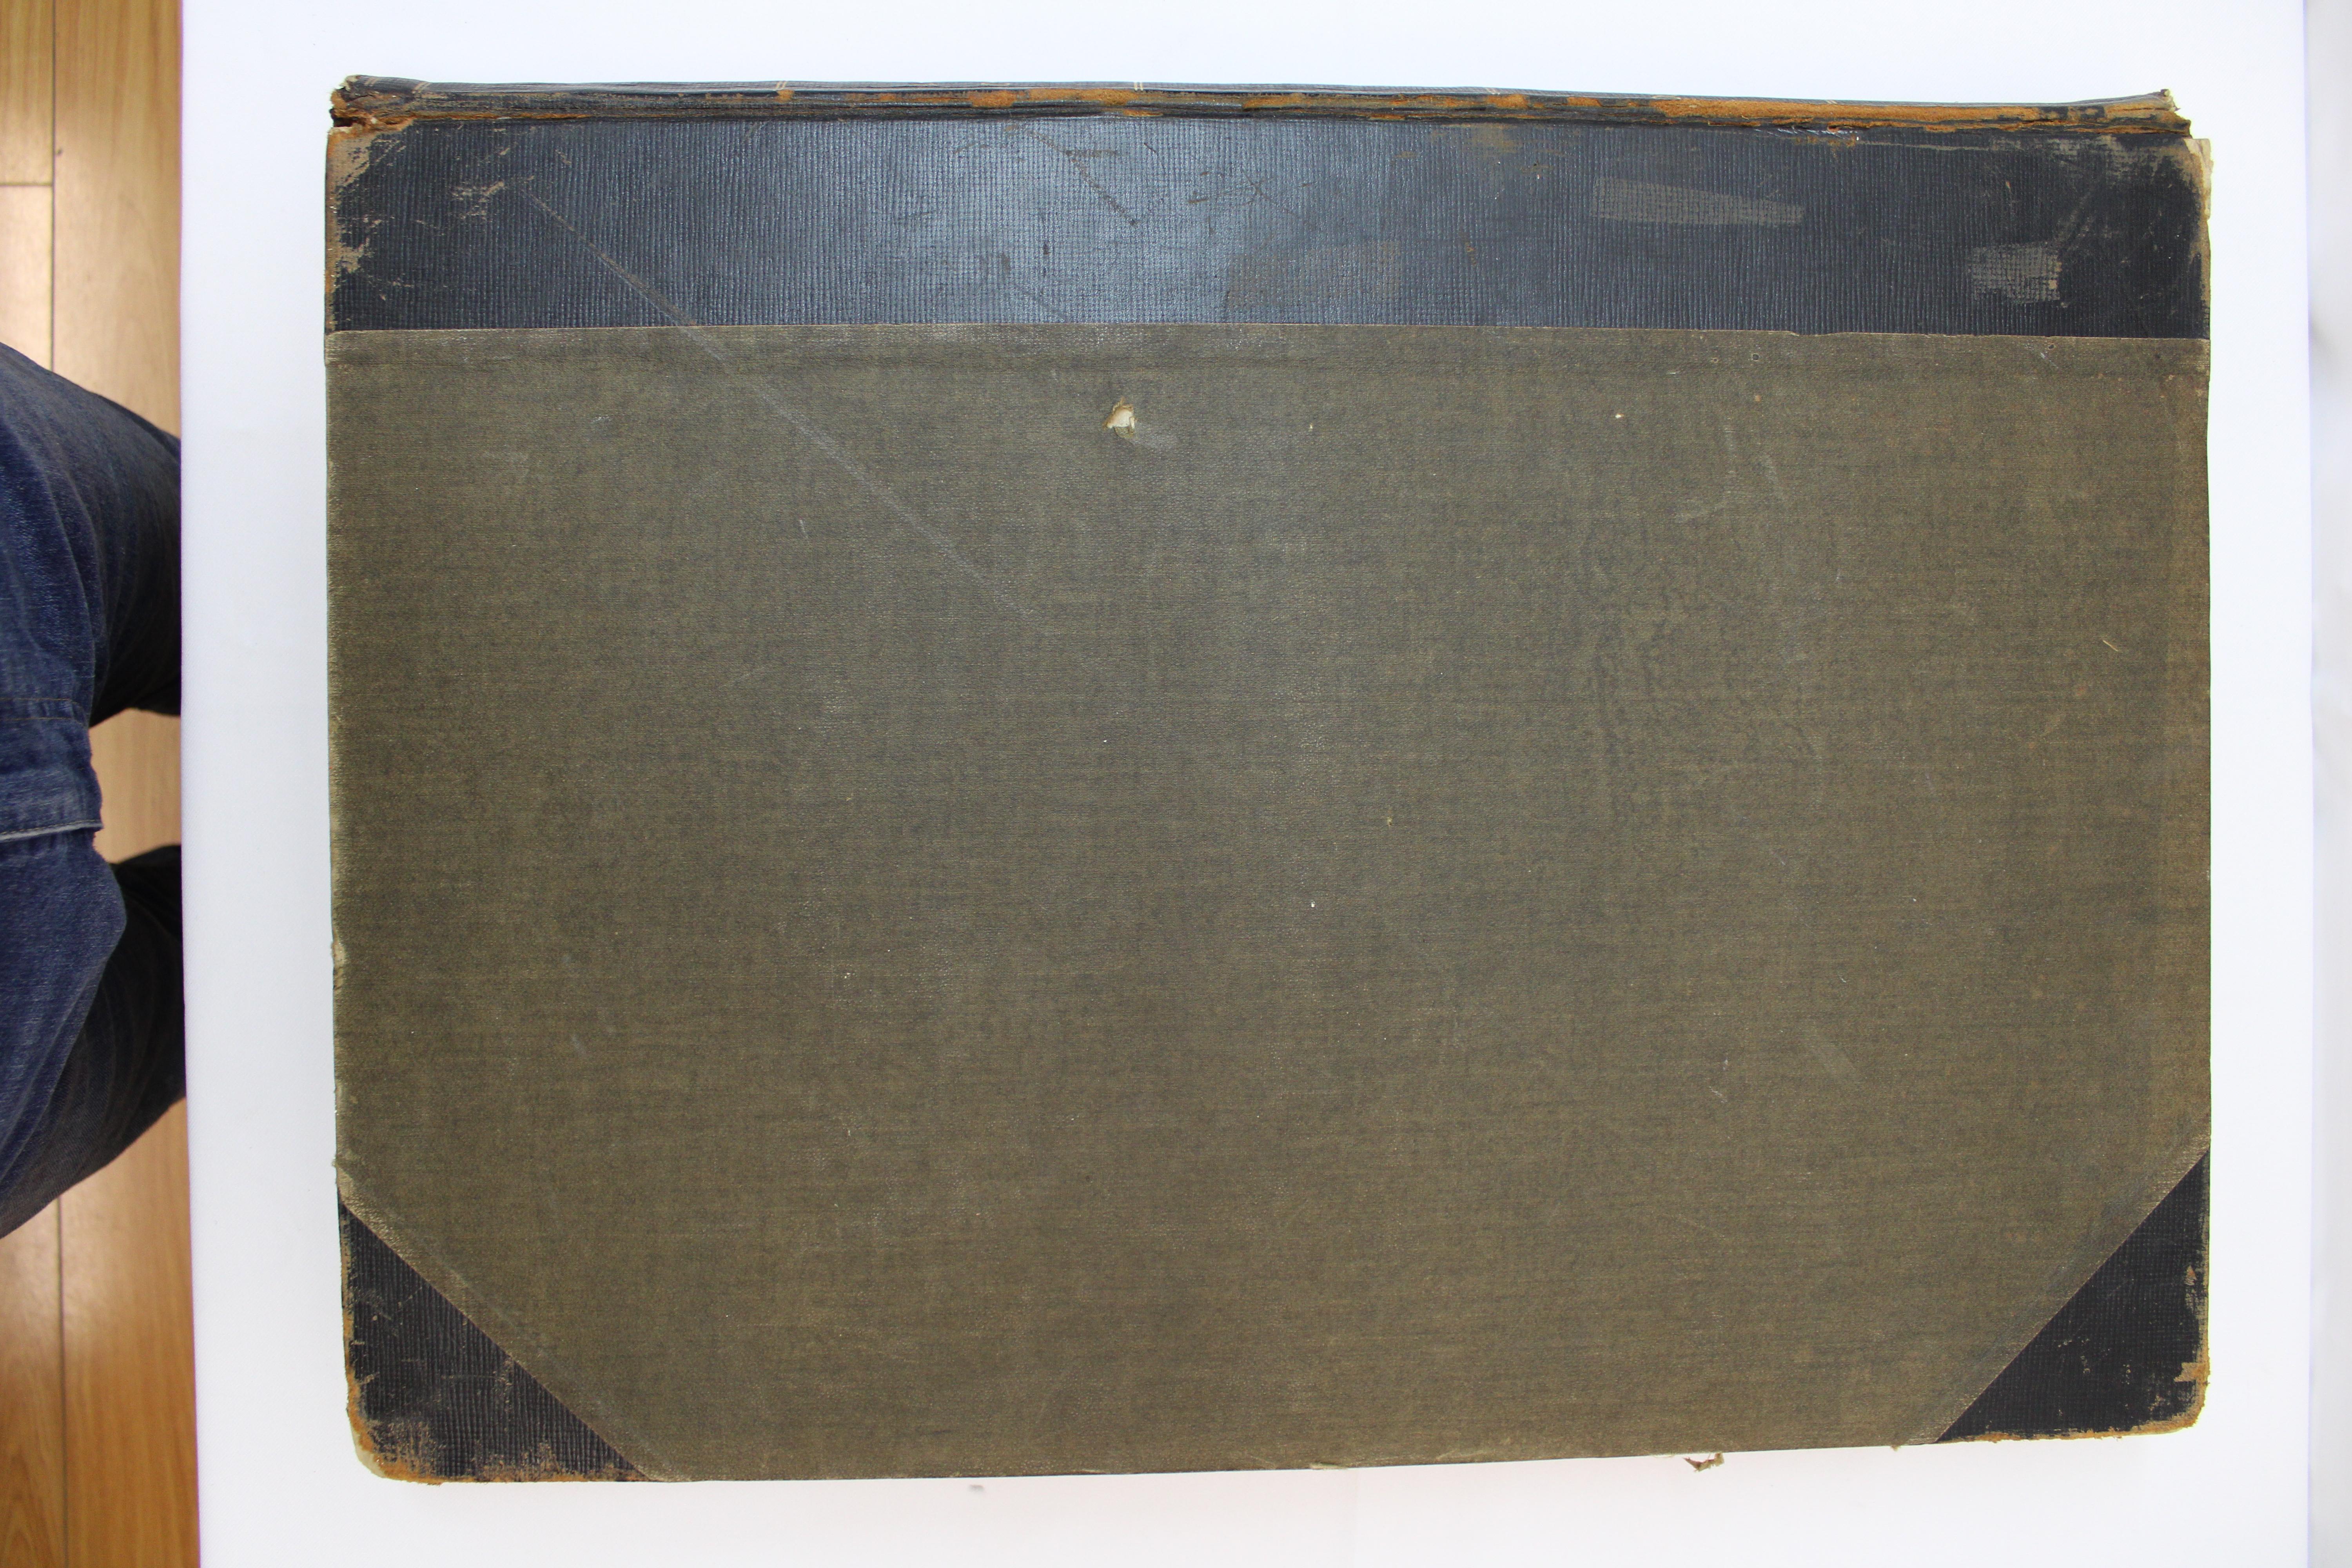 Leather bound volume of San Francisco news, 1940-41 (World War II period) with hundreds of newspaper pages.